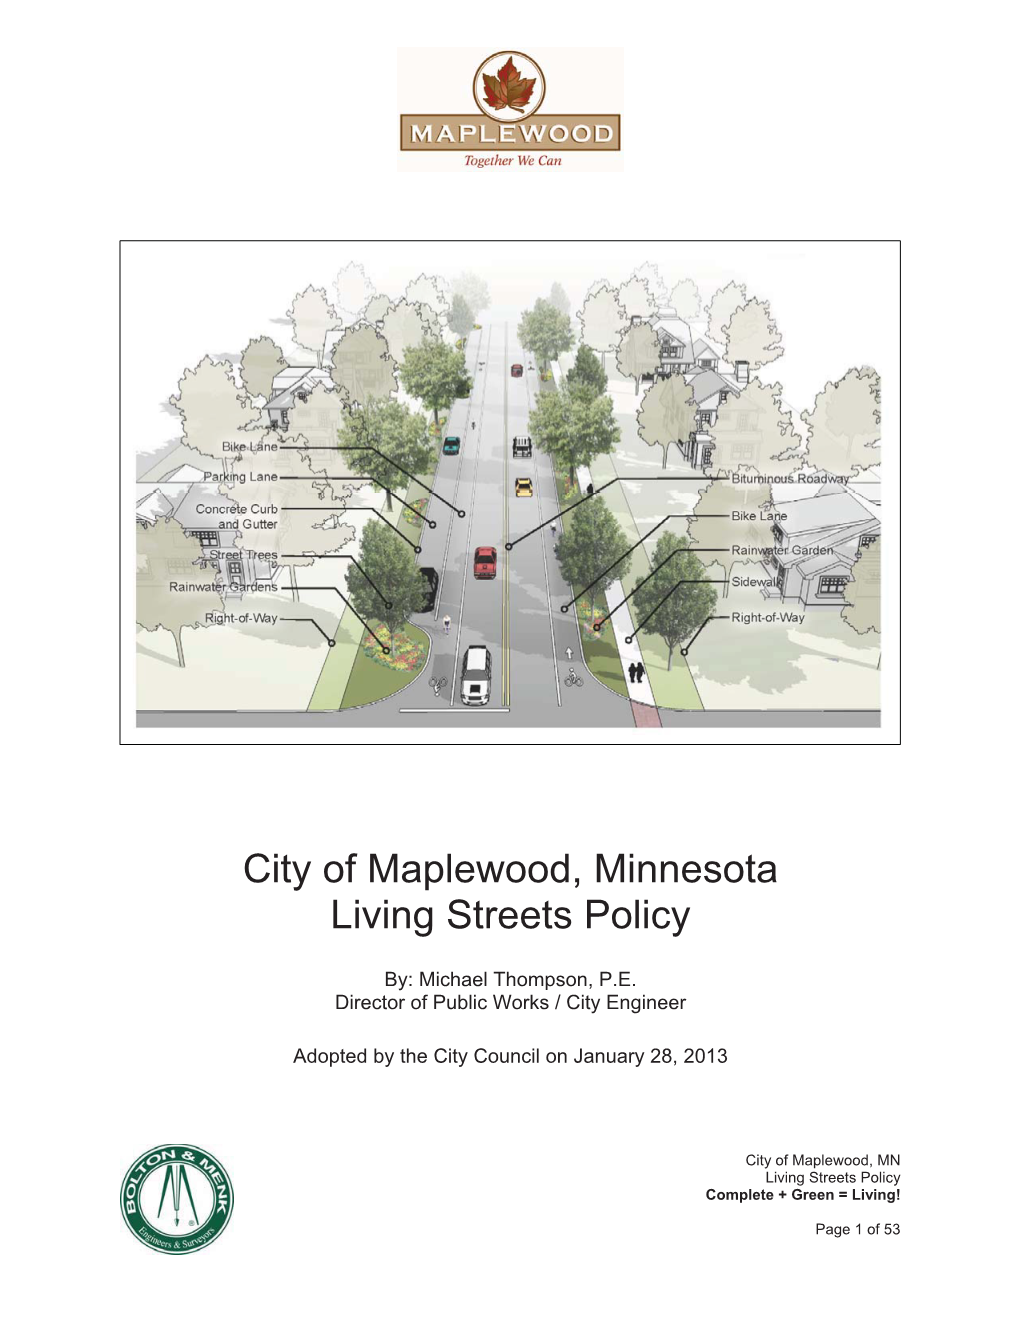 City of Maplewood, Minnesota Living Streets Policy